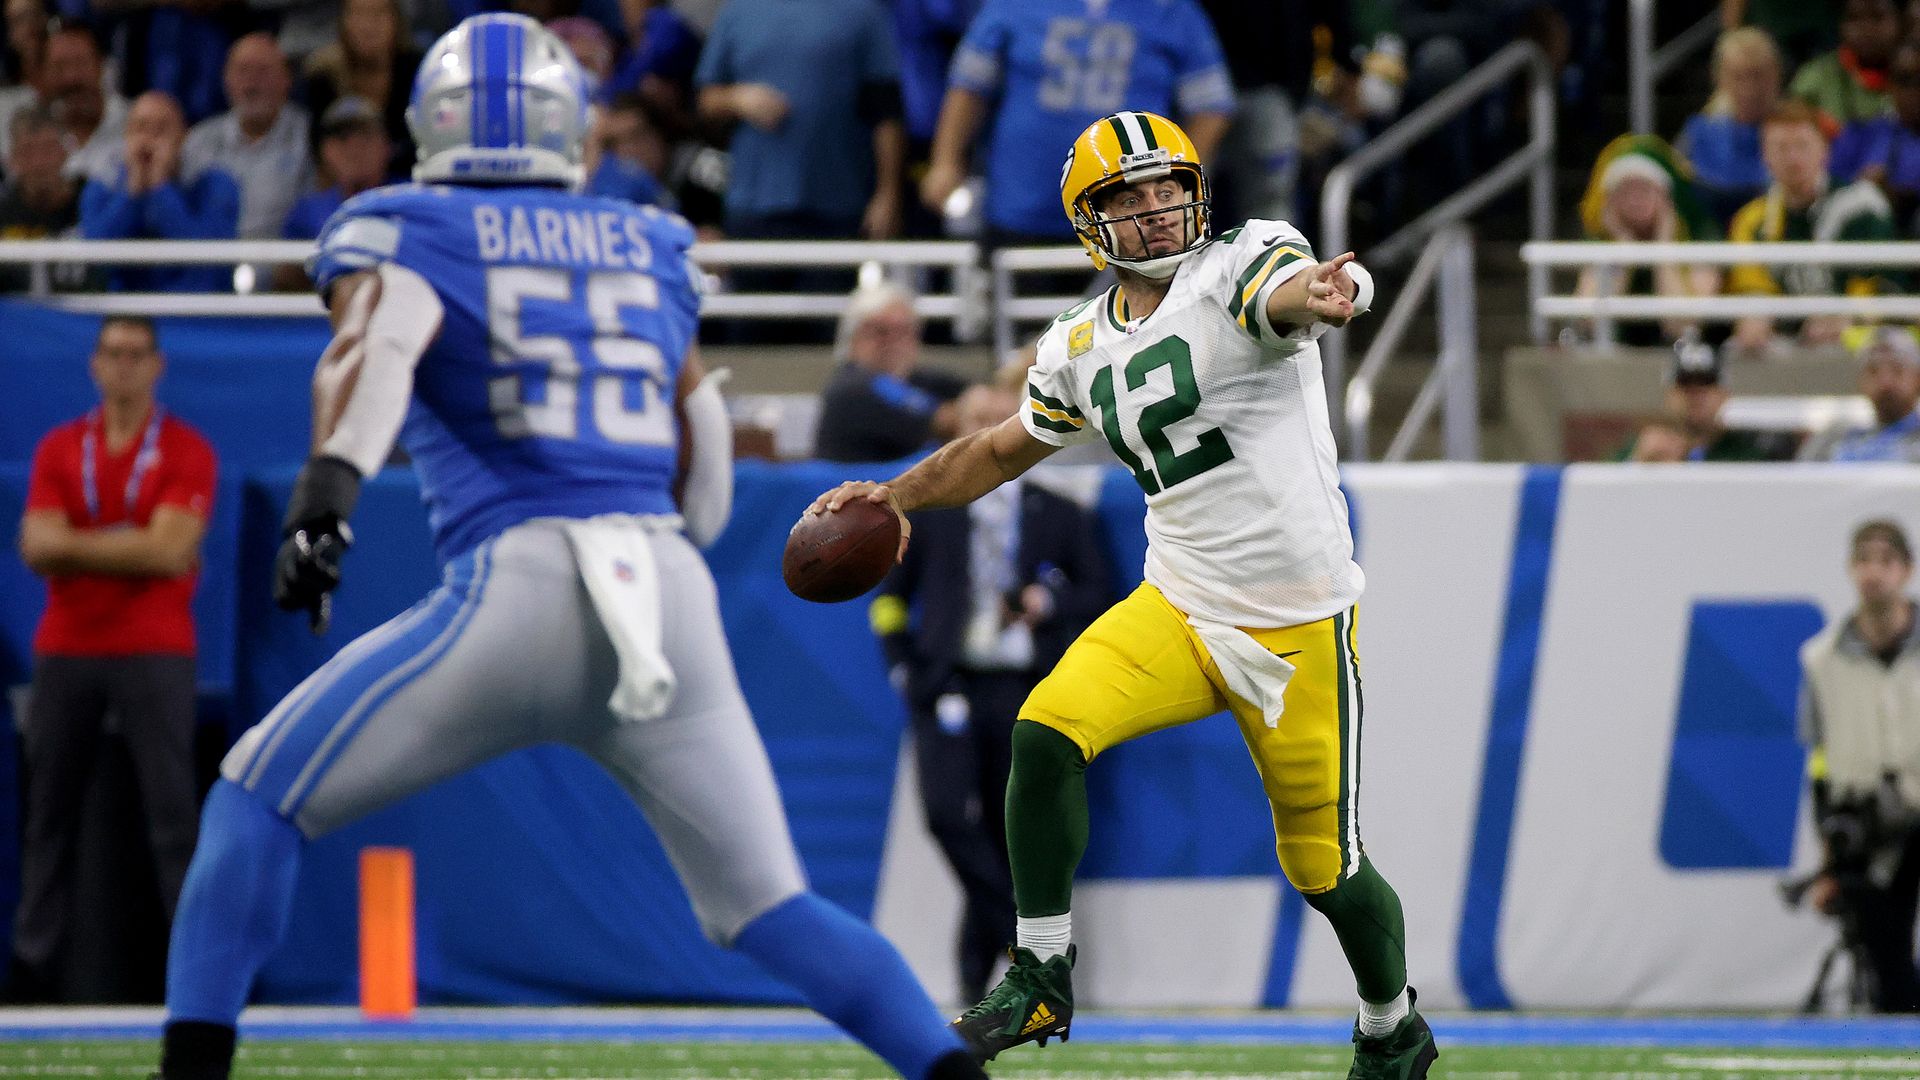 Packers QB Aaron Rodgers looks to pass